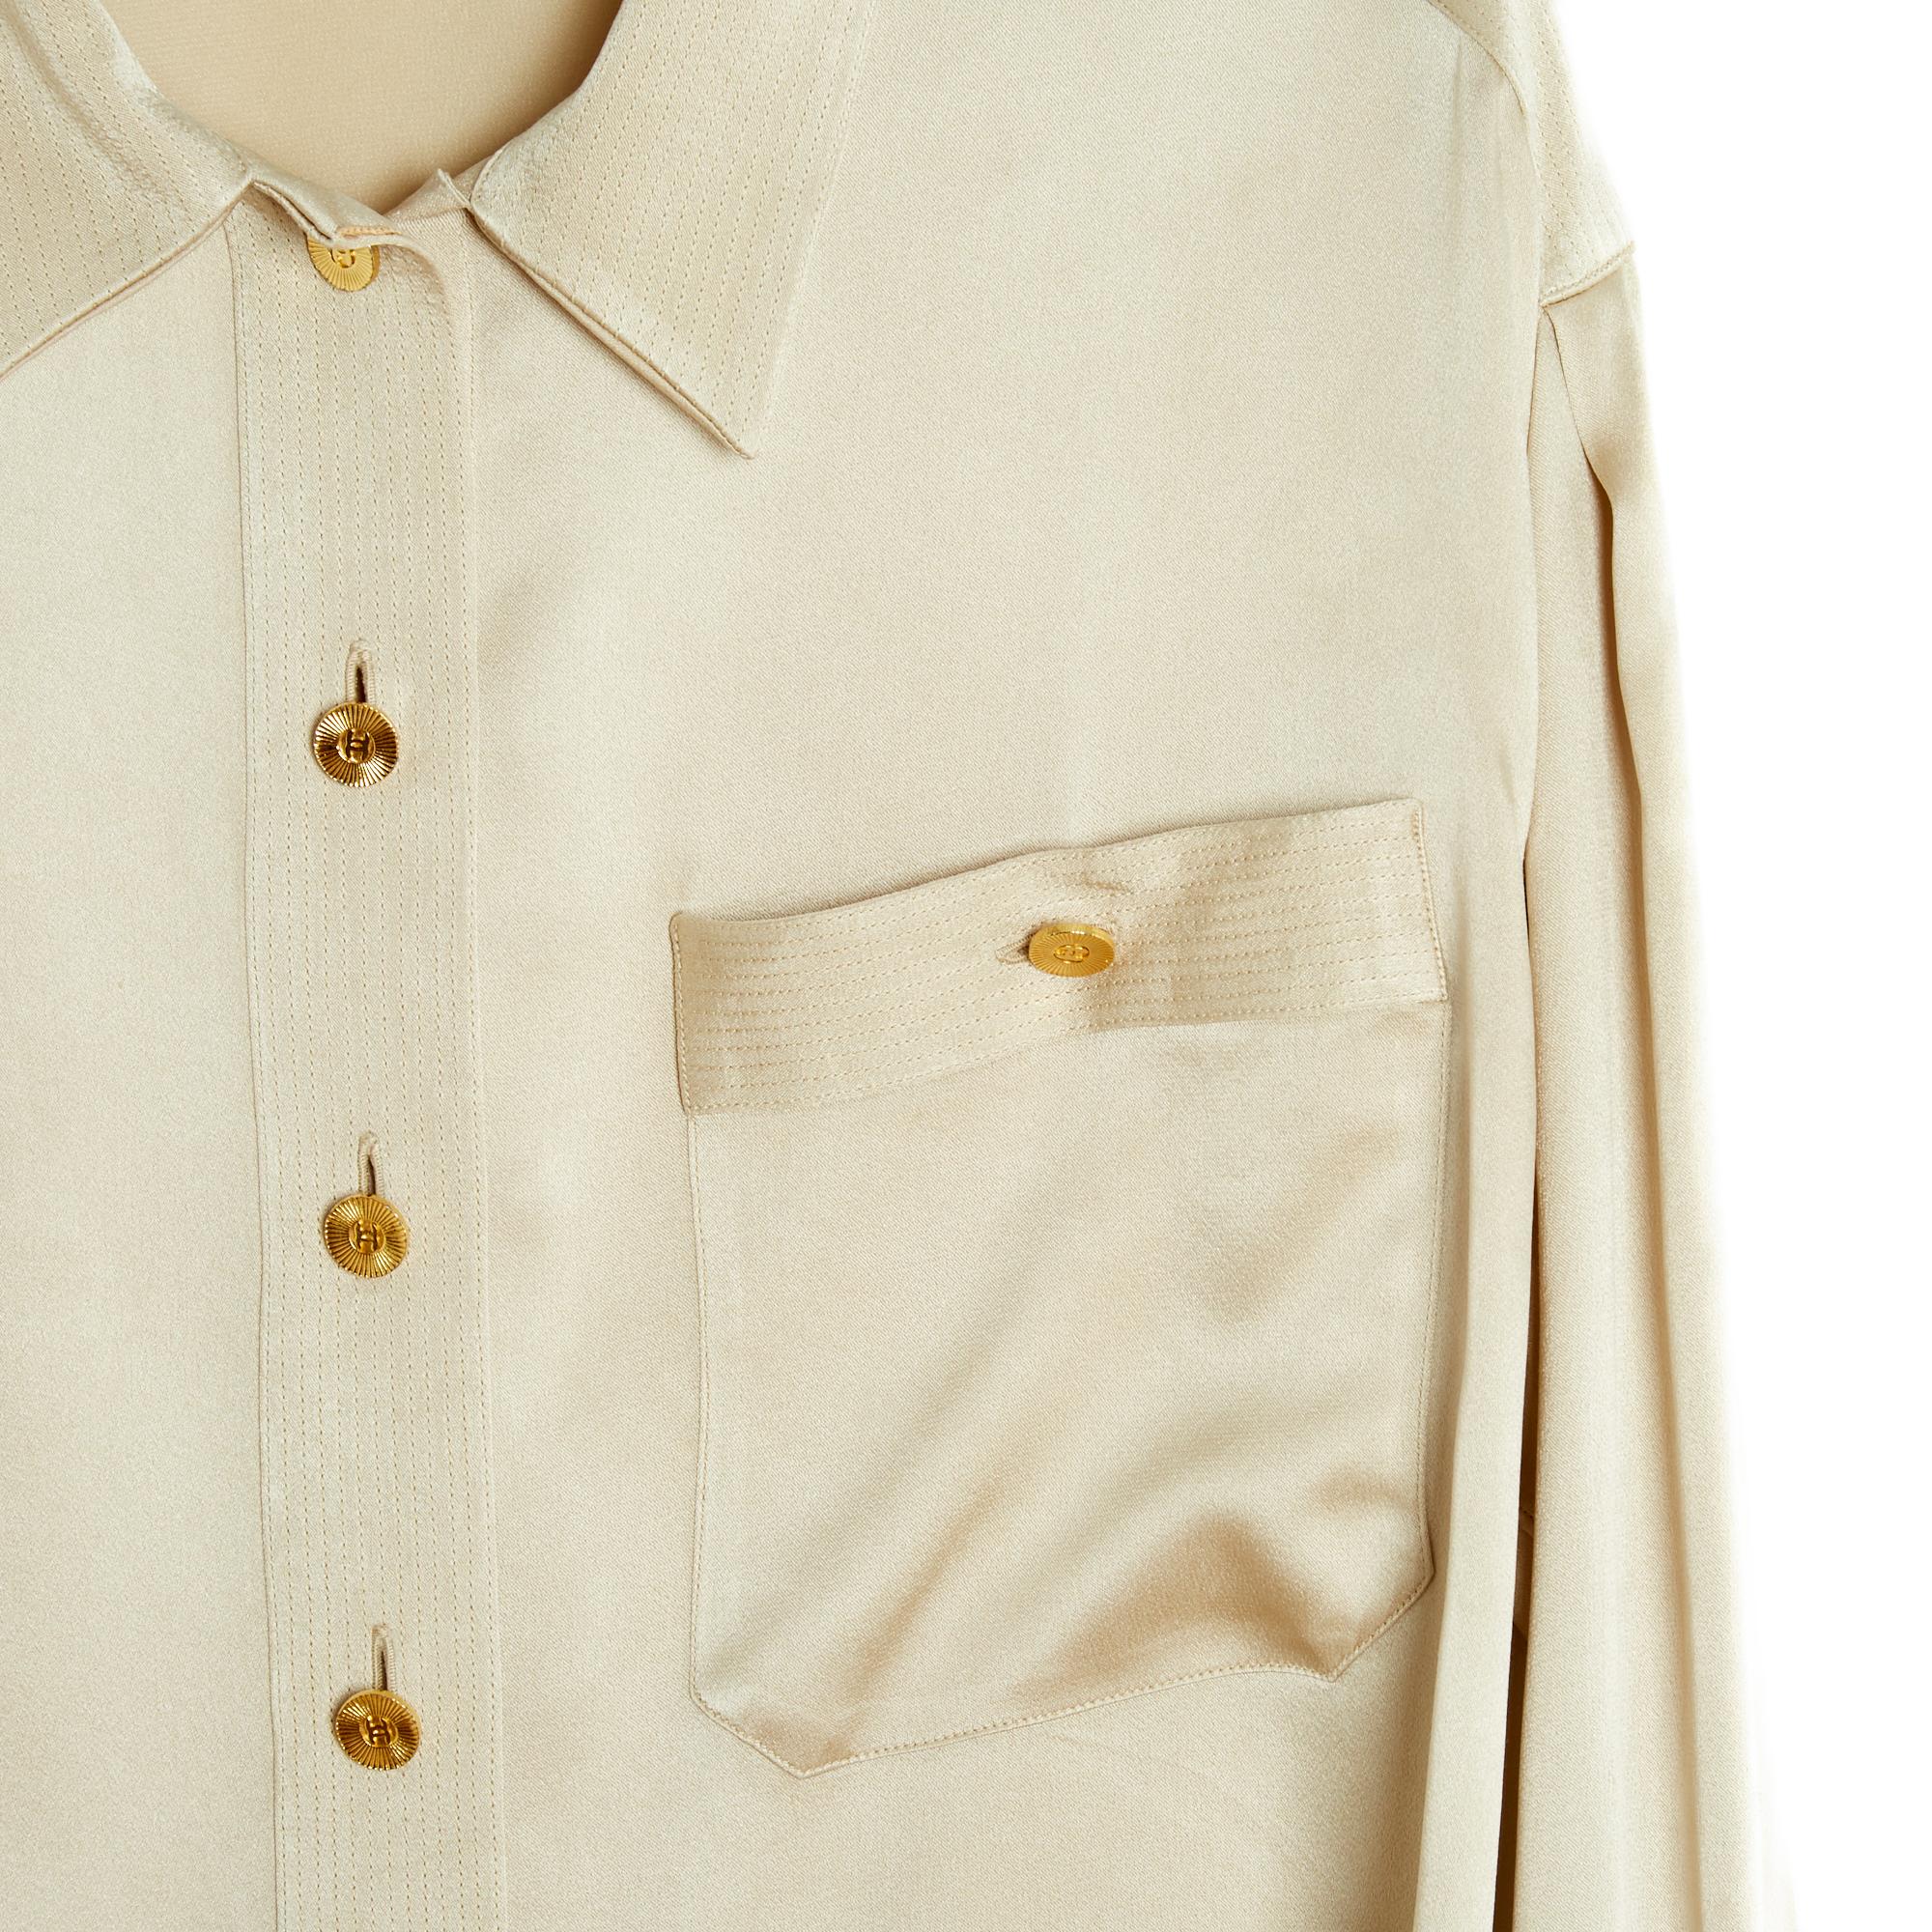 Top Chanel Spring Summer 1995 collection slightly oversized full-length blouse in beige silk satin, collar closed with 7 CC logo buttons in gold metal, patch chest pocket closed with a button, 